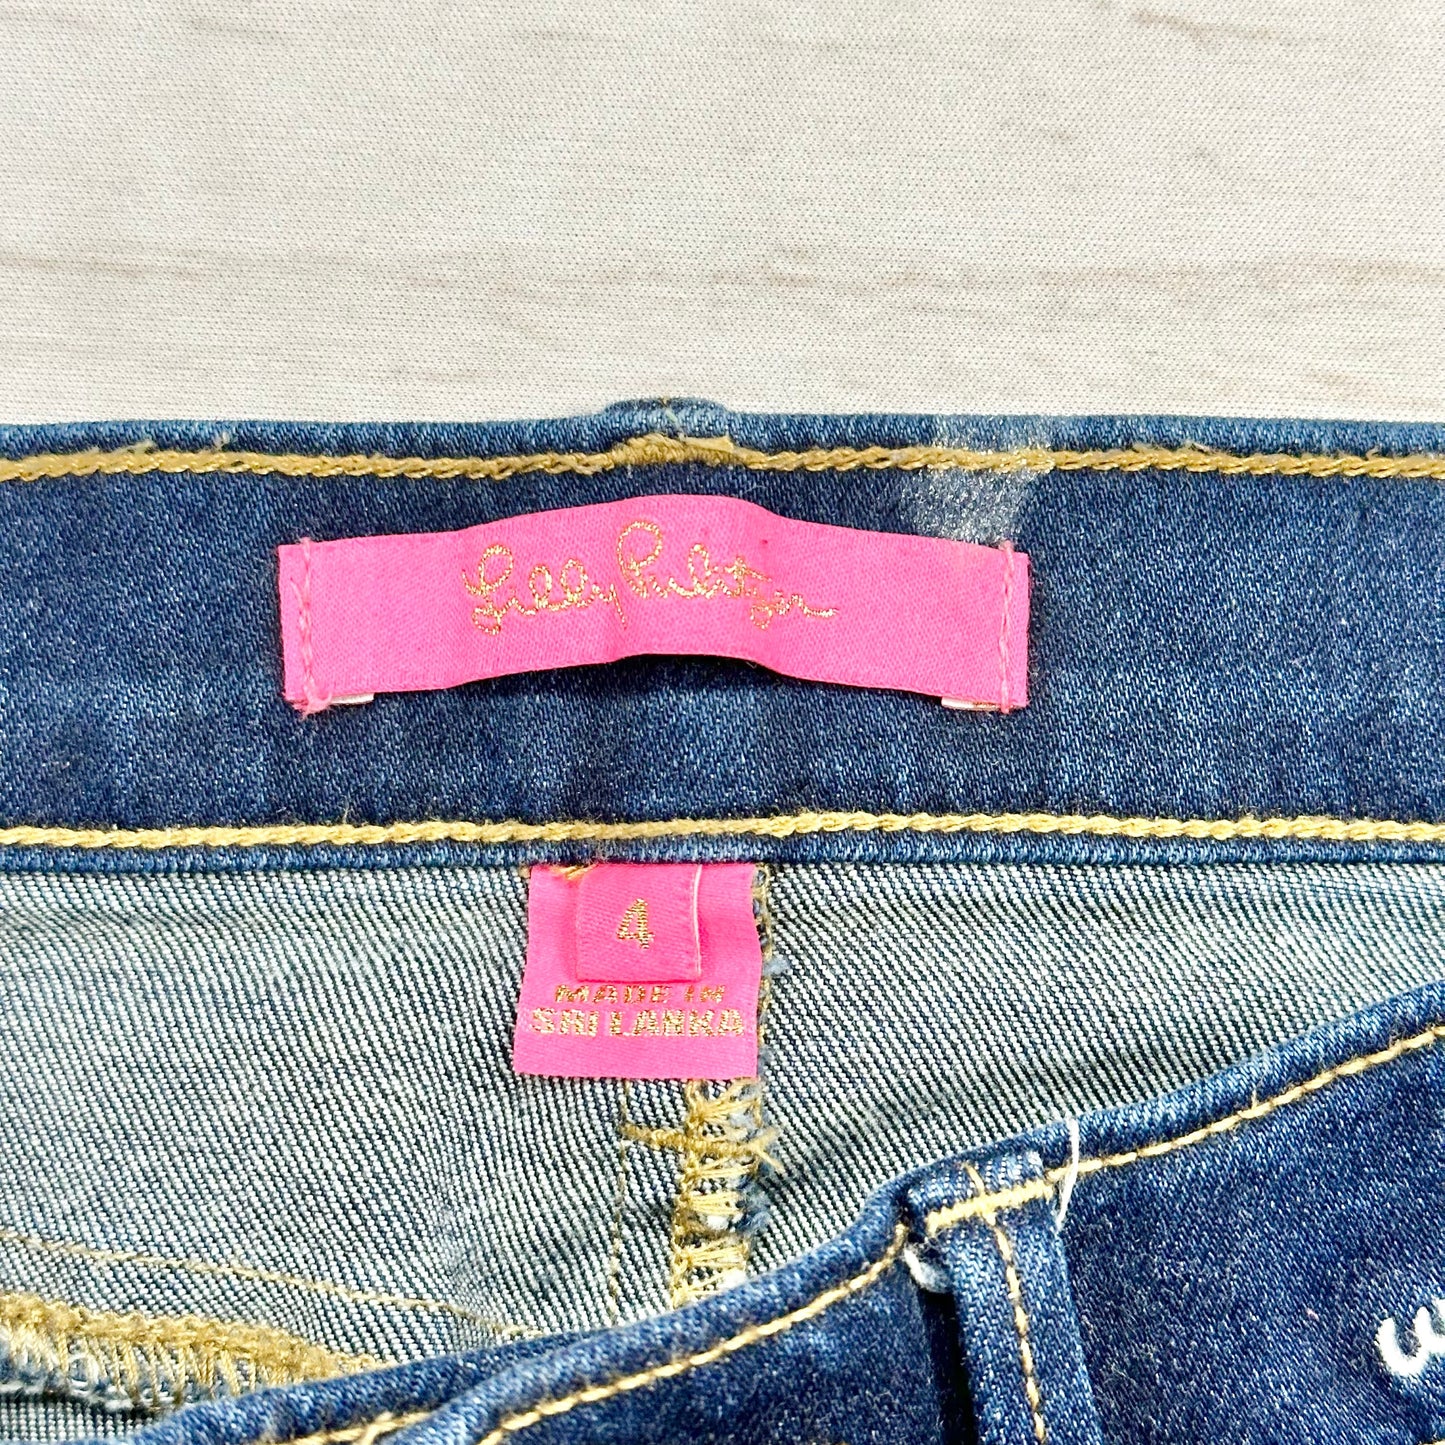 Jeans Designer By Lilly Pulitzer  Size: 4